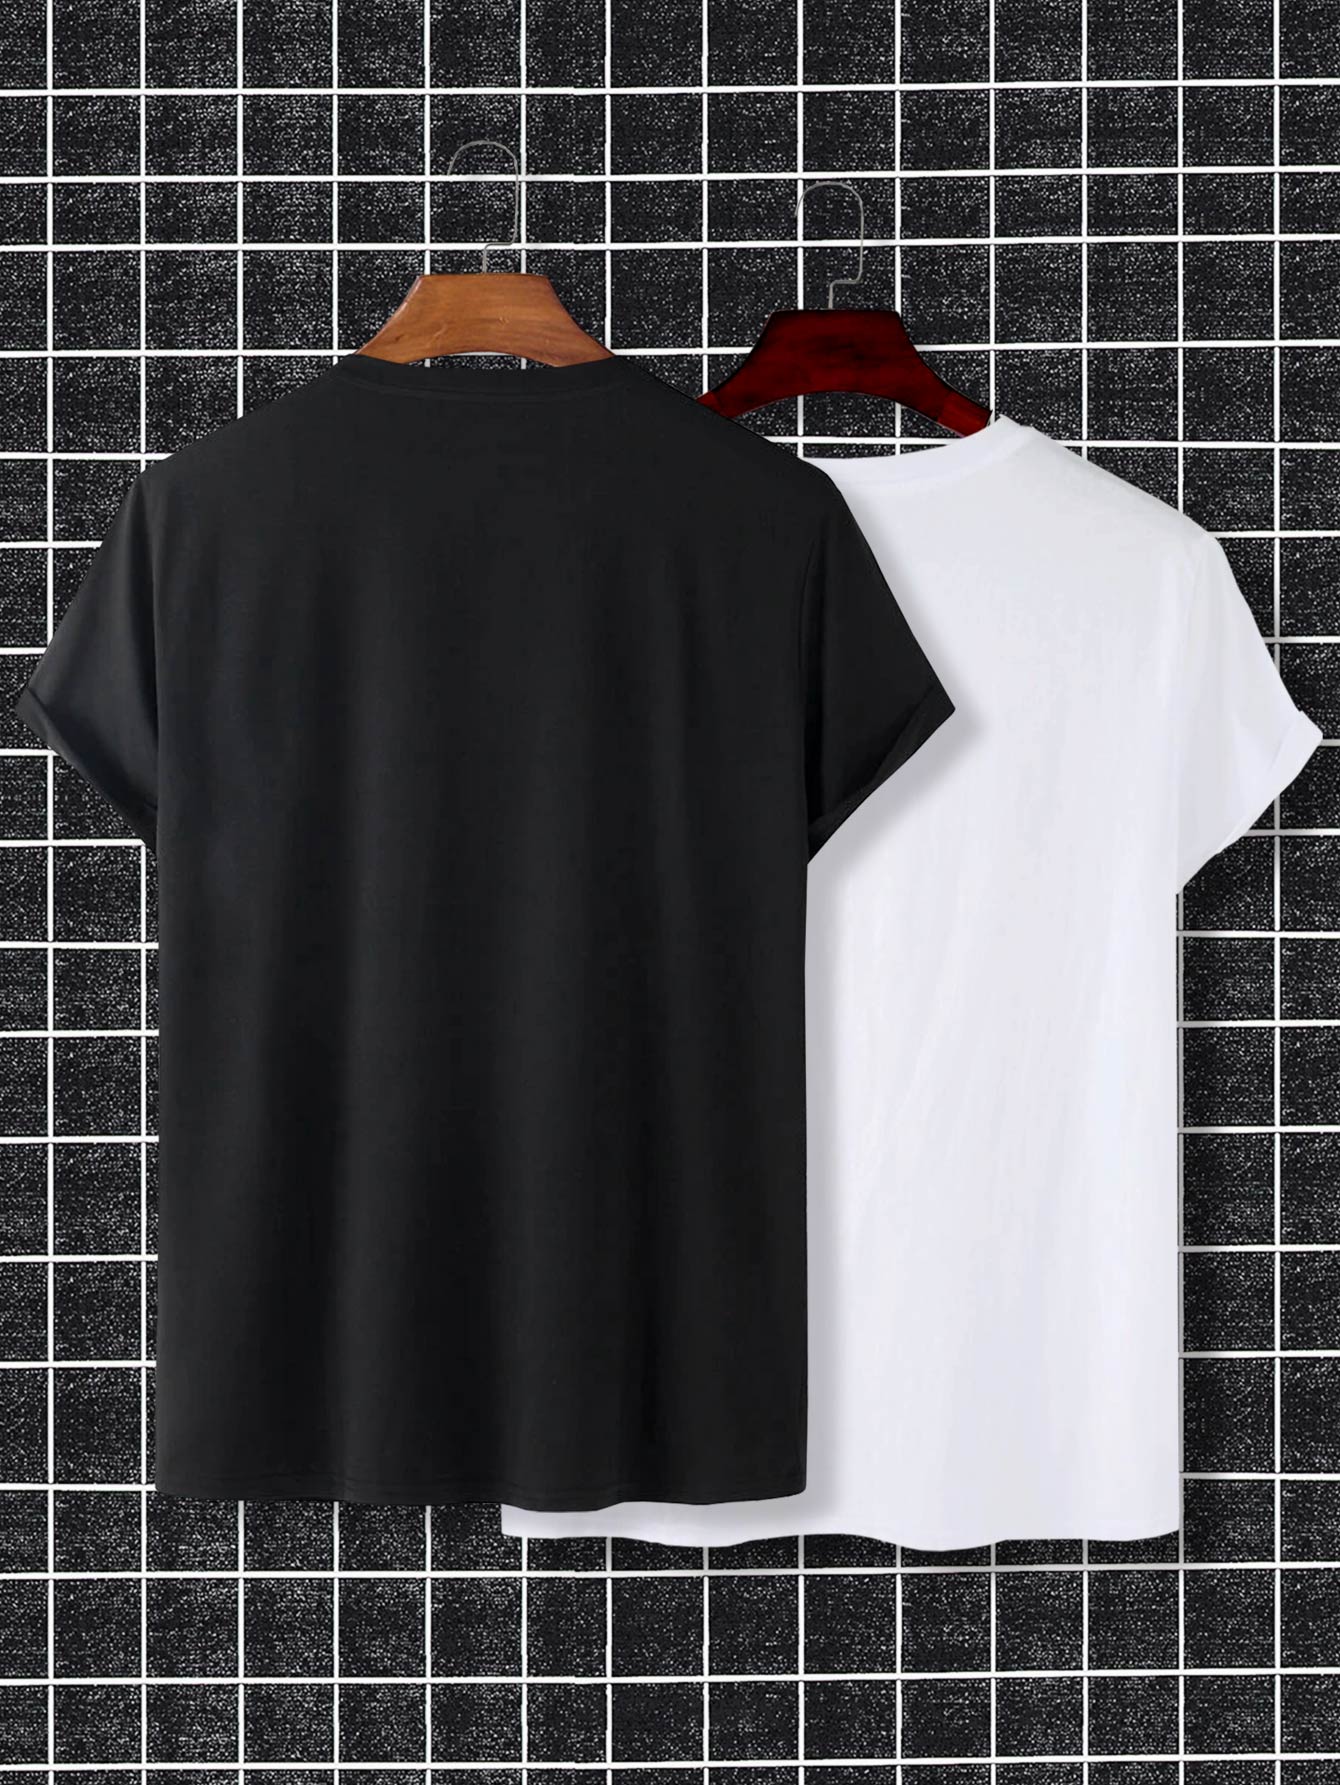 Men's Casual Solid Basic Tee 2pcs - Round Neck, Short Sleeve, Regular Fit